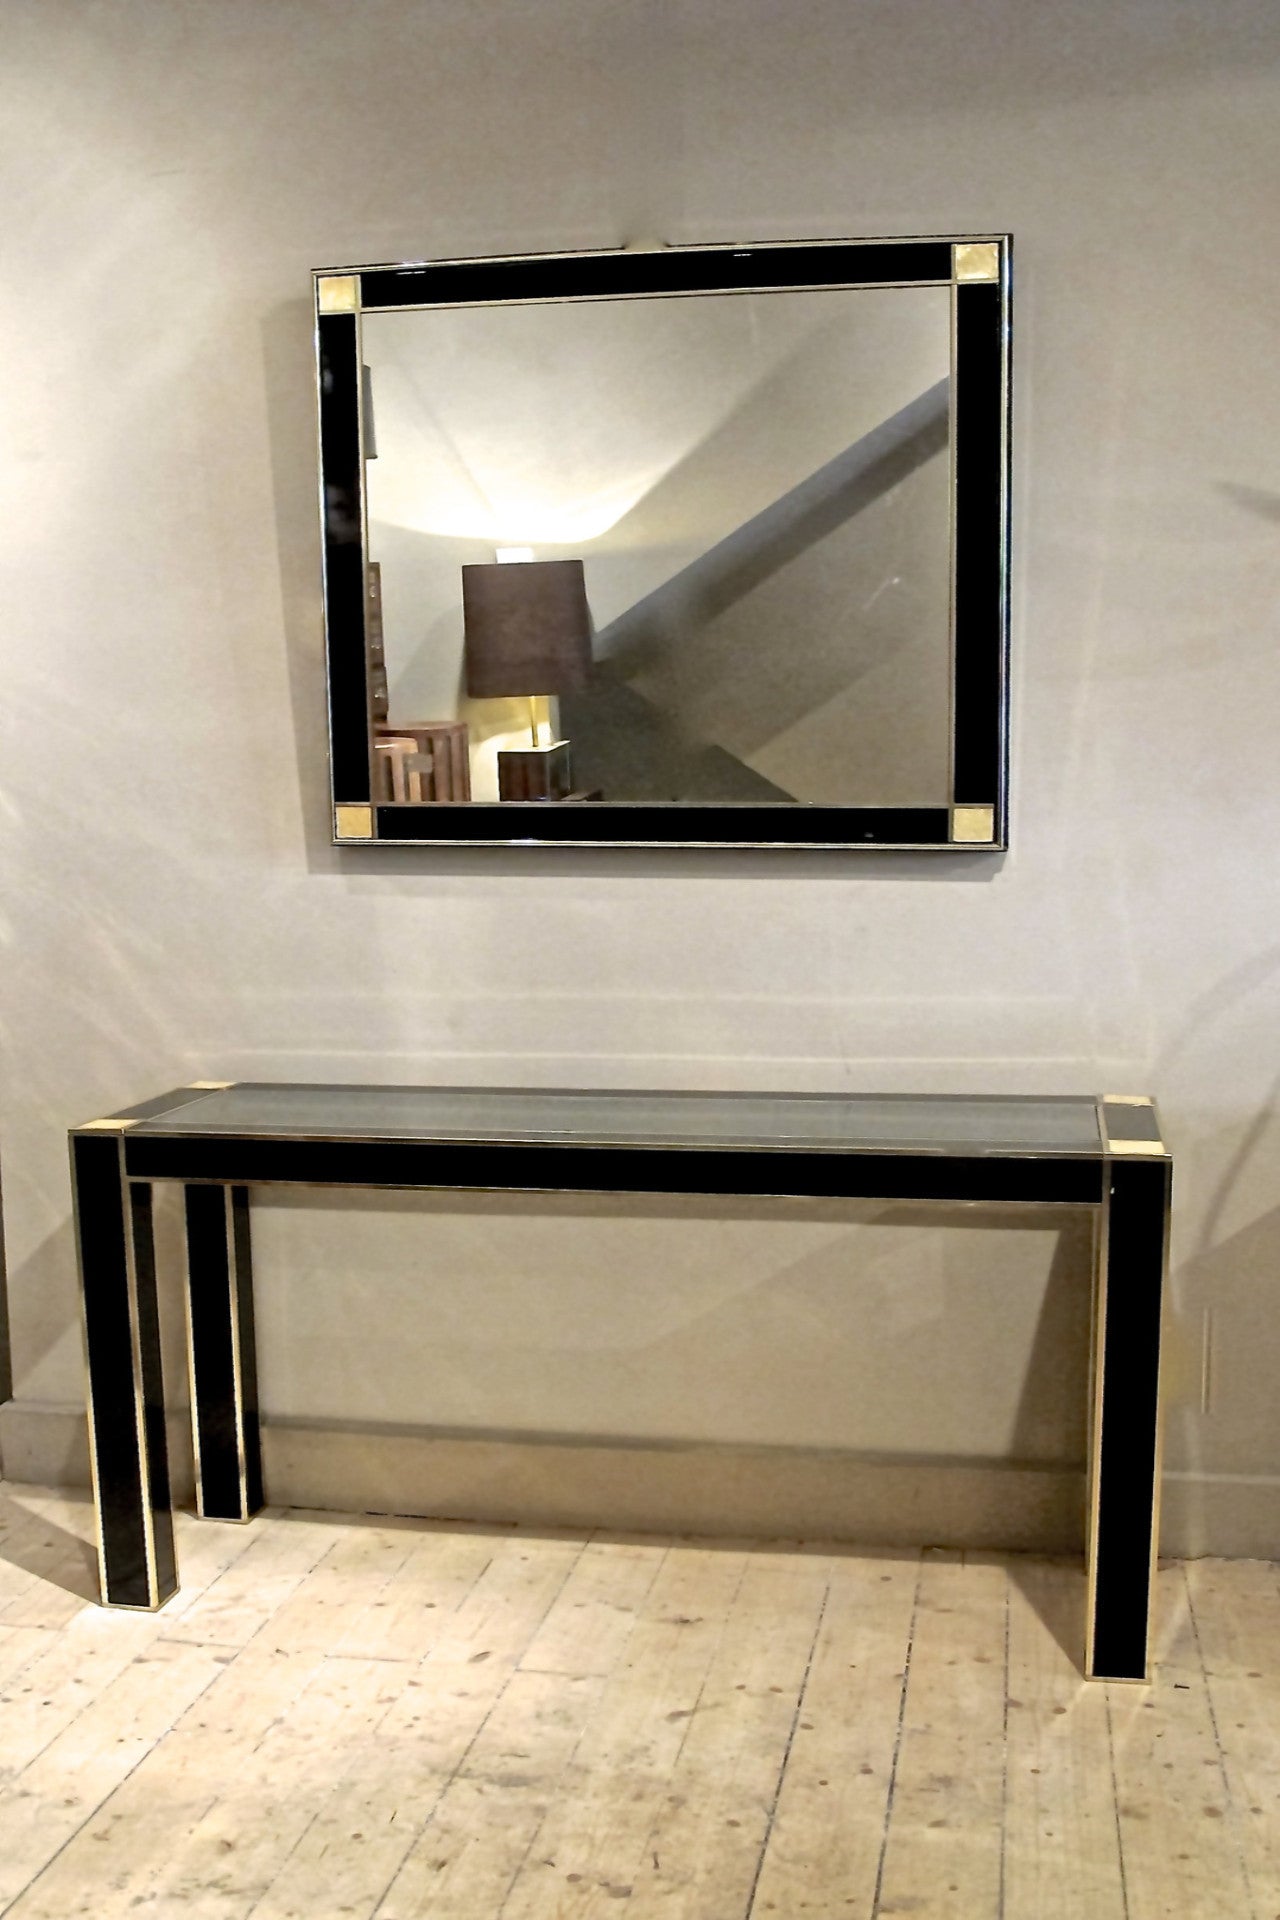 X A superb quality black lacquer console and mirror with solid brass trim and mother of pearl corner details.